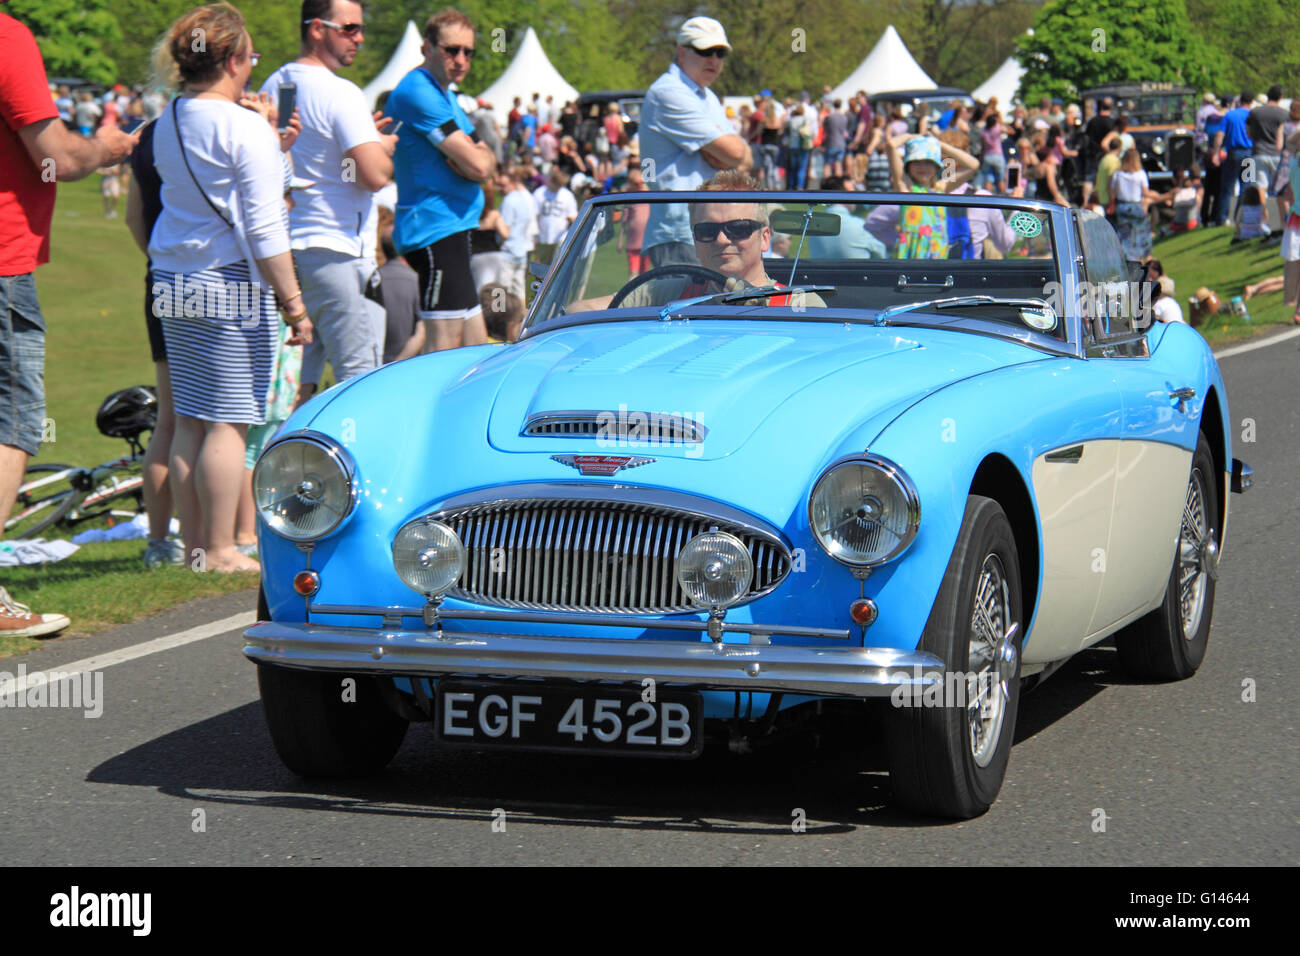 Austin-Healey 3000 Mark III (1964). Chestnut Sunday, 8th May 2016. Bushy Park, Hampton Court, London Borough of Richmond, England, Great Britain, United Kingdom, UK, Europe. Vintage and classic vehicle parade and displays with fairground attractions and military reenactments. Credit:  Ian Bottle / Alamy Live News Stock Photo